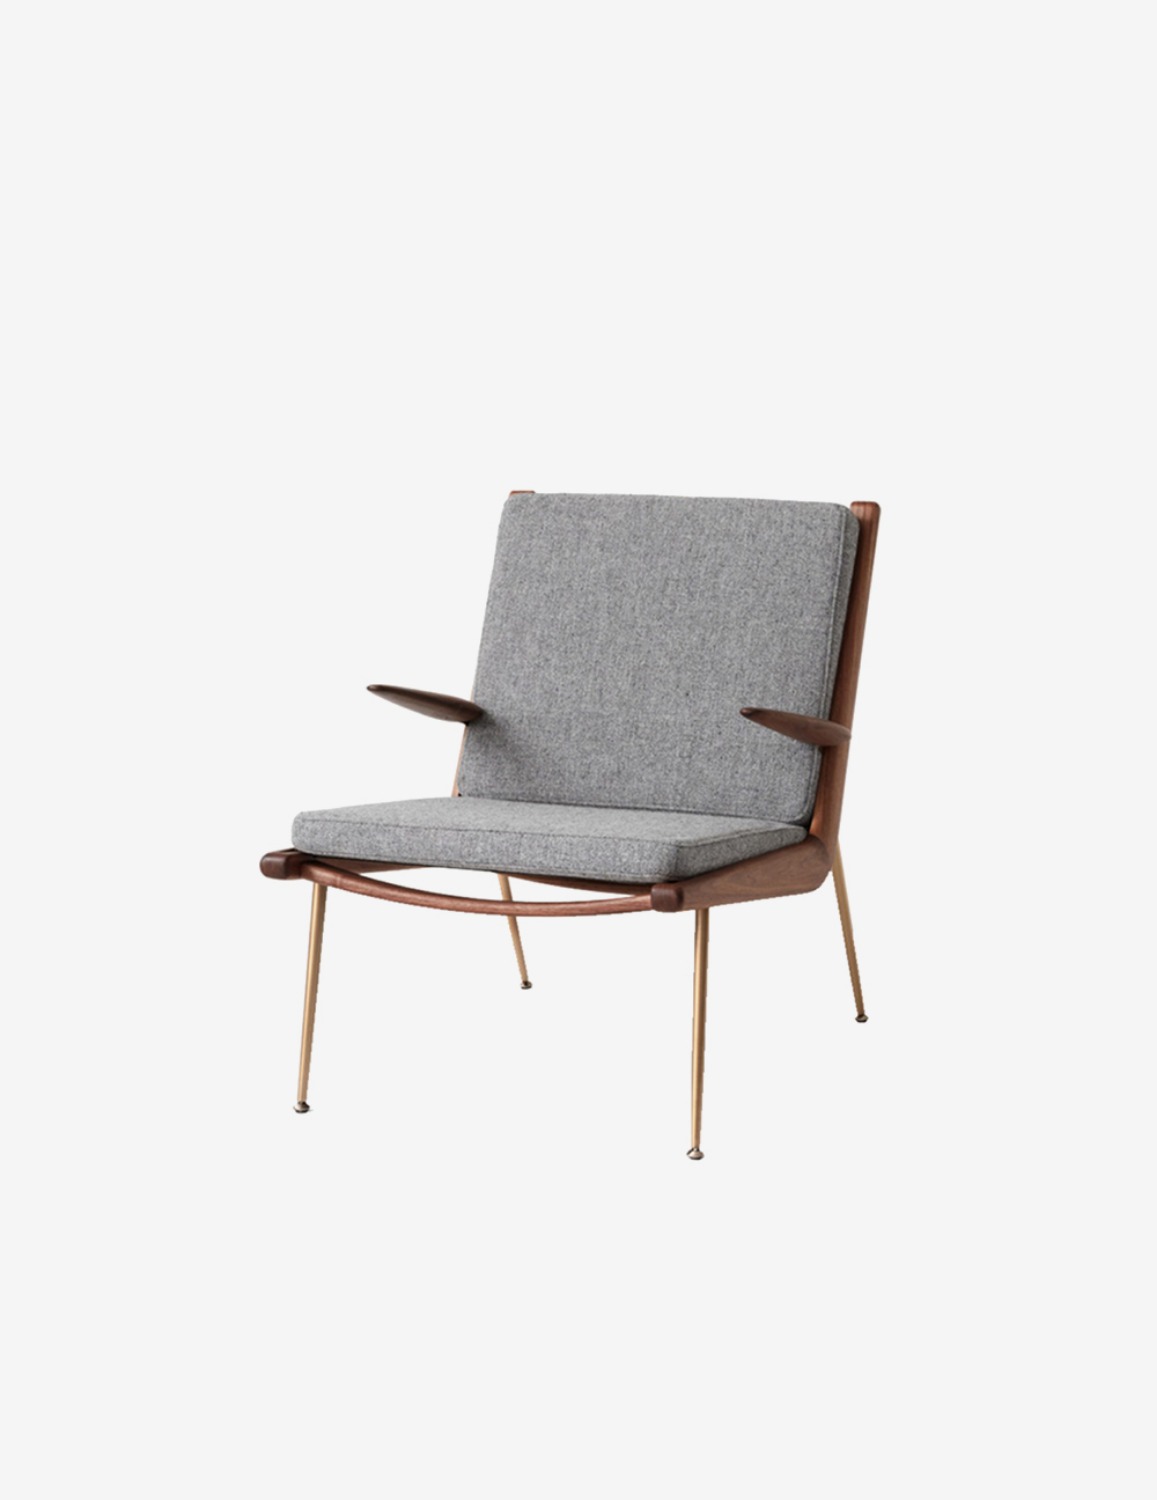 [&amp;Tradition] Boomerang lounge chair / HM2